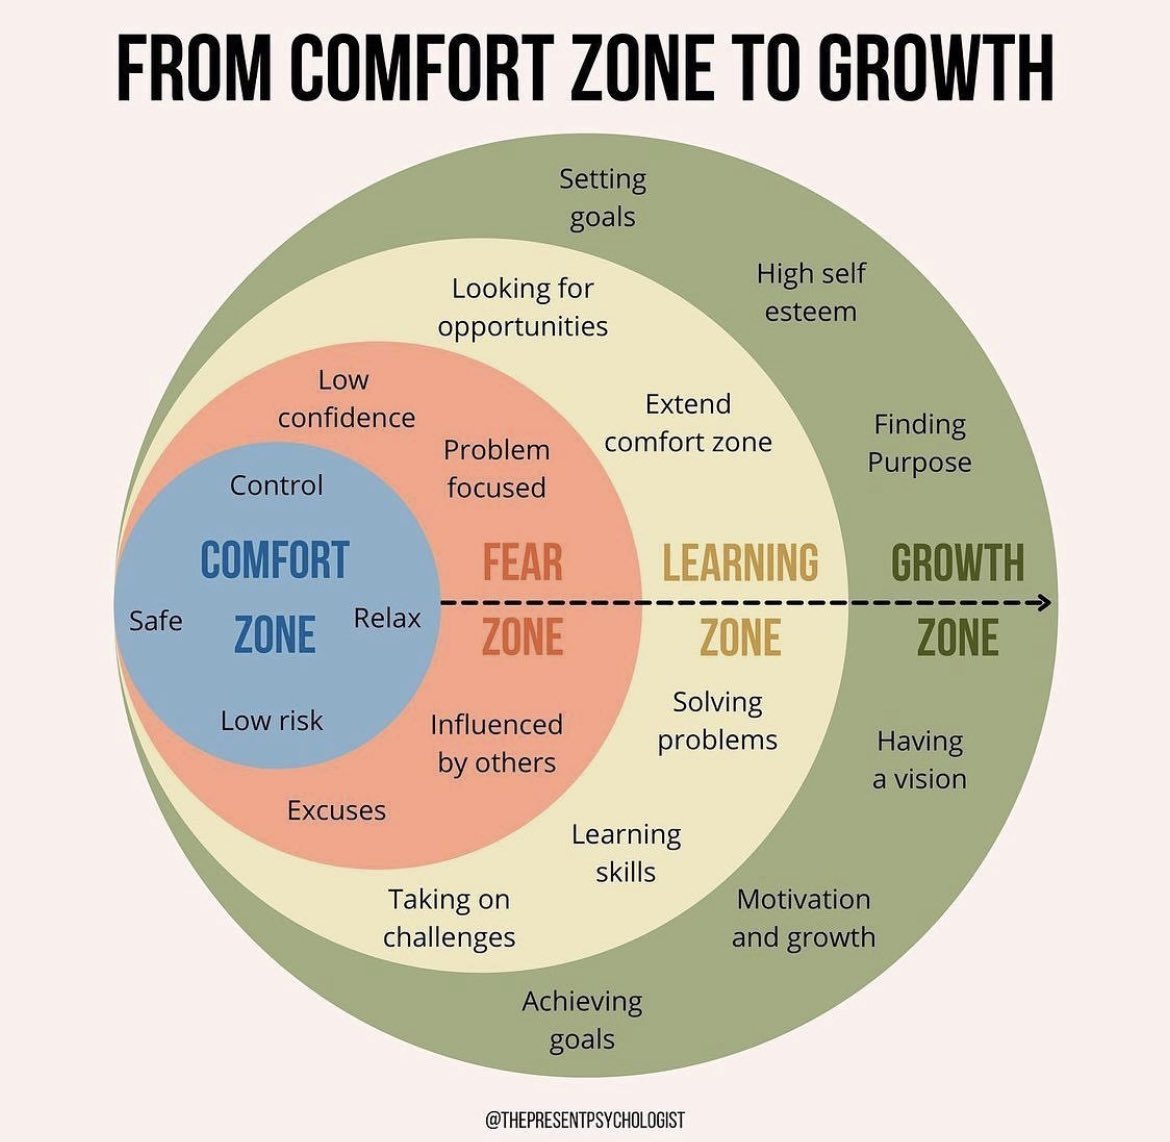 I often talk about magic happening outside of our comfort zone. I love this image because it shows the progression from comfort to growth. I’m here for it… 💙 #GrowthIsUncomfortable